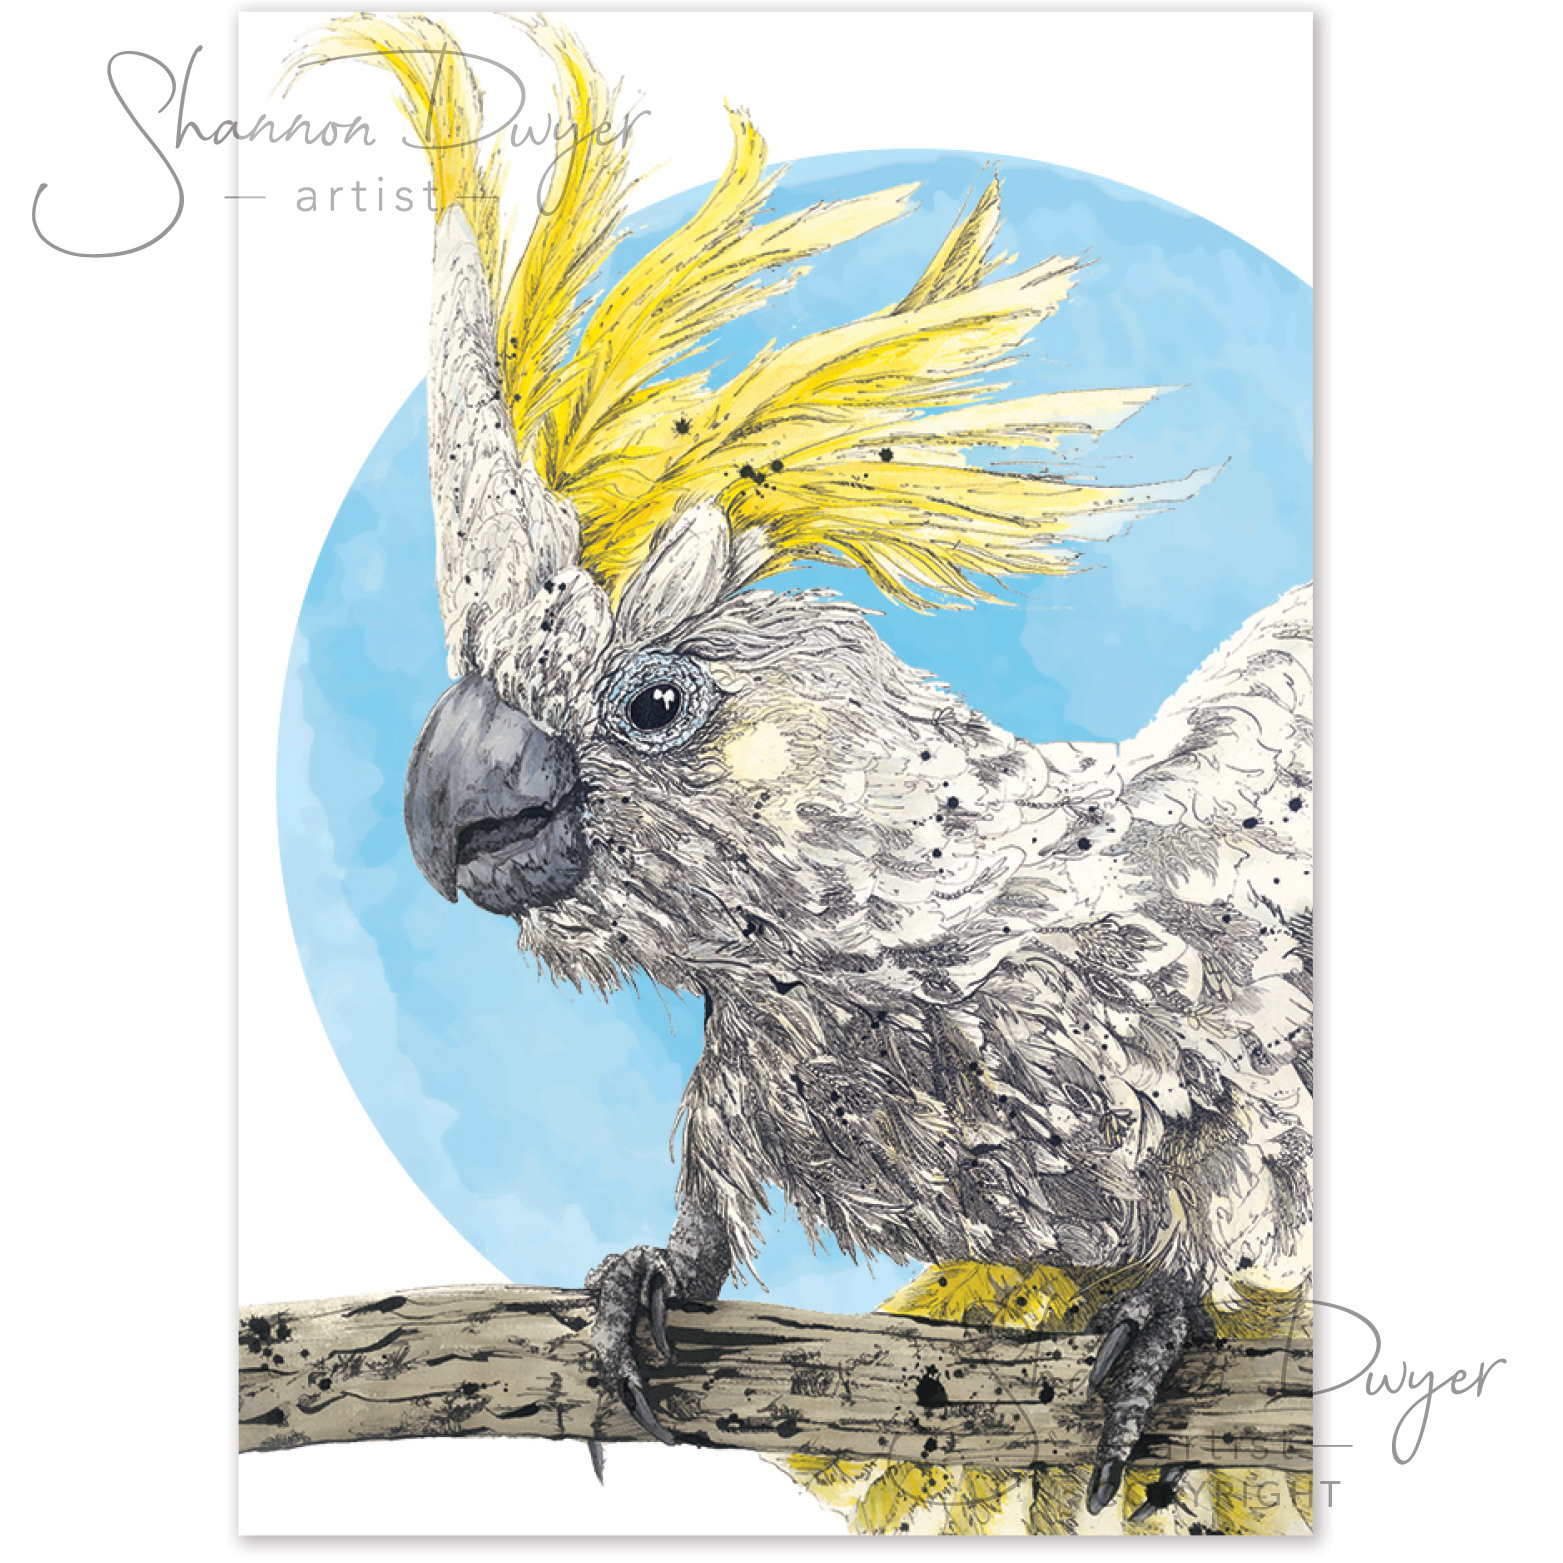 'Maaate' POP Greeting Card artwork of a Sulphur-crested Cockatoo by Shannon Dwyer Artist